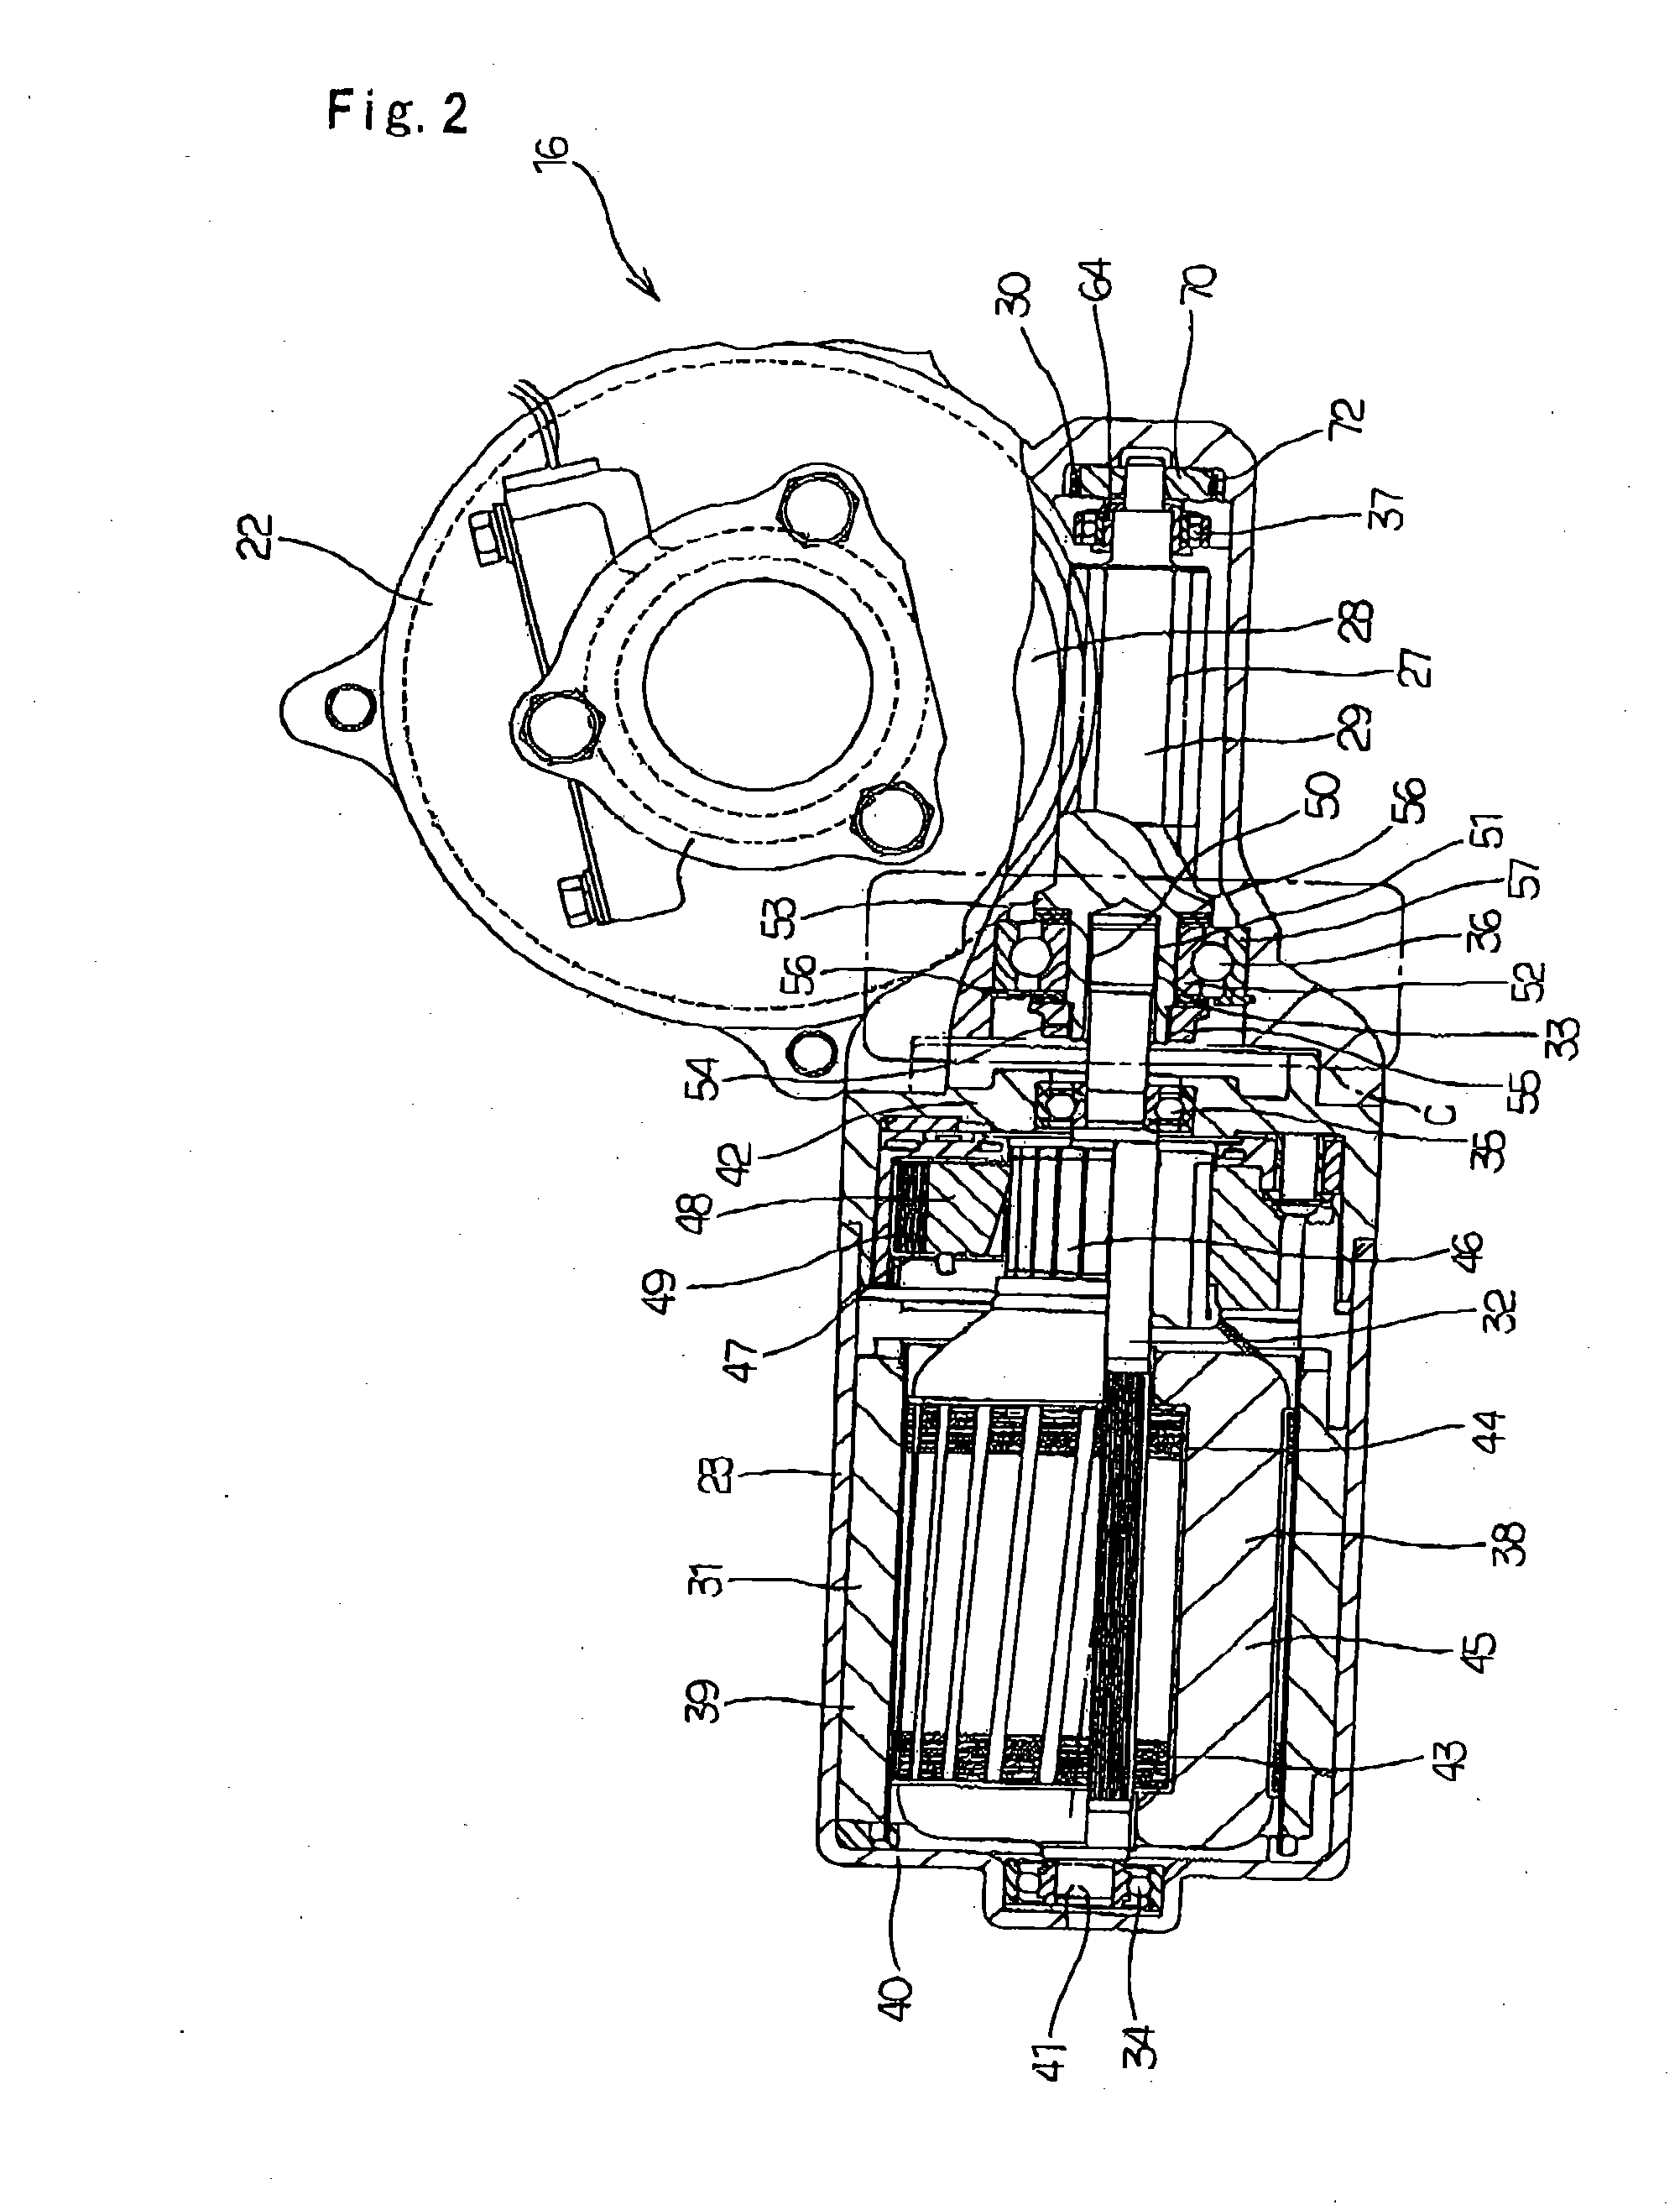 Electric-powered power steering apparatus